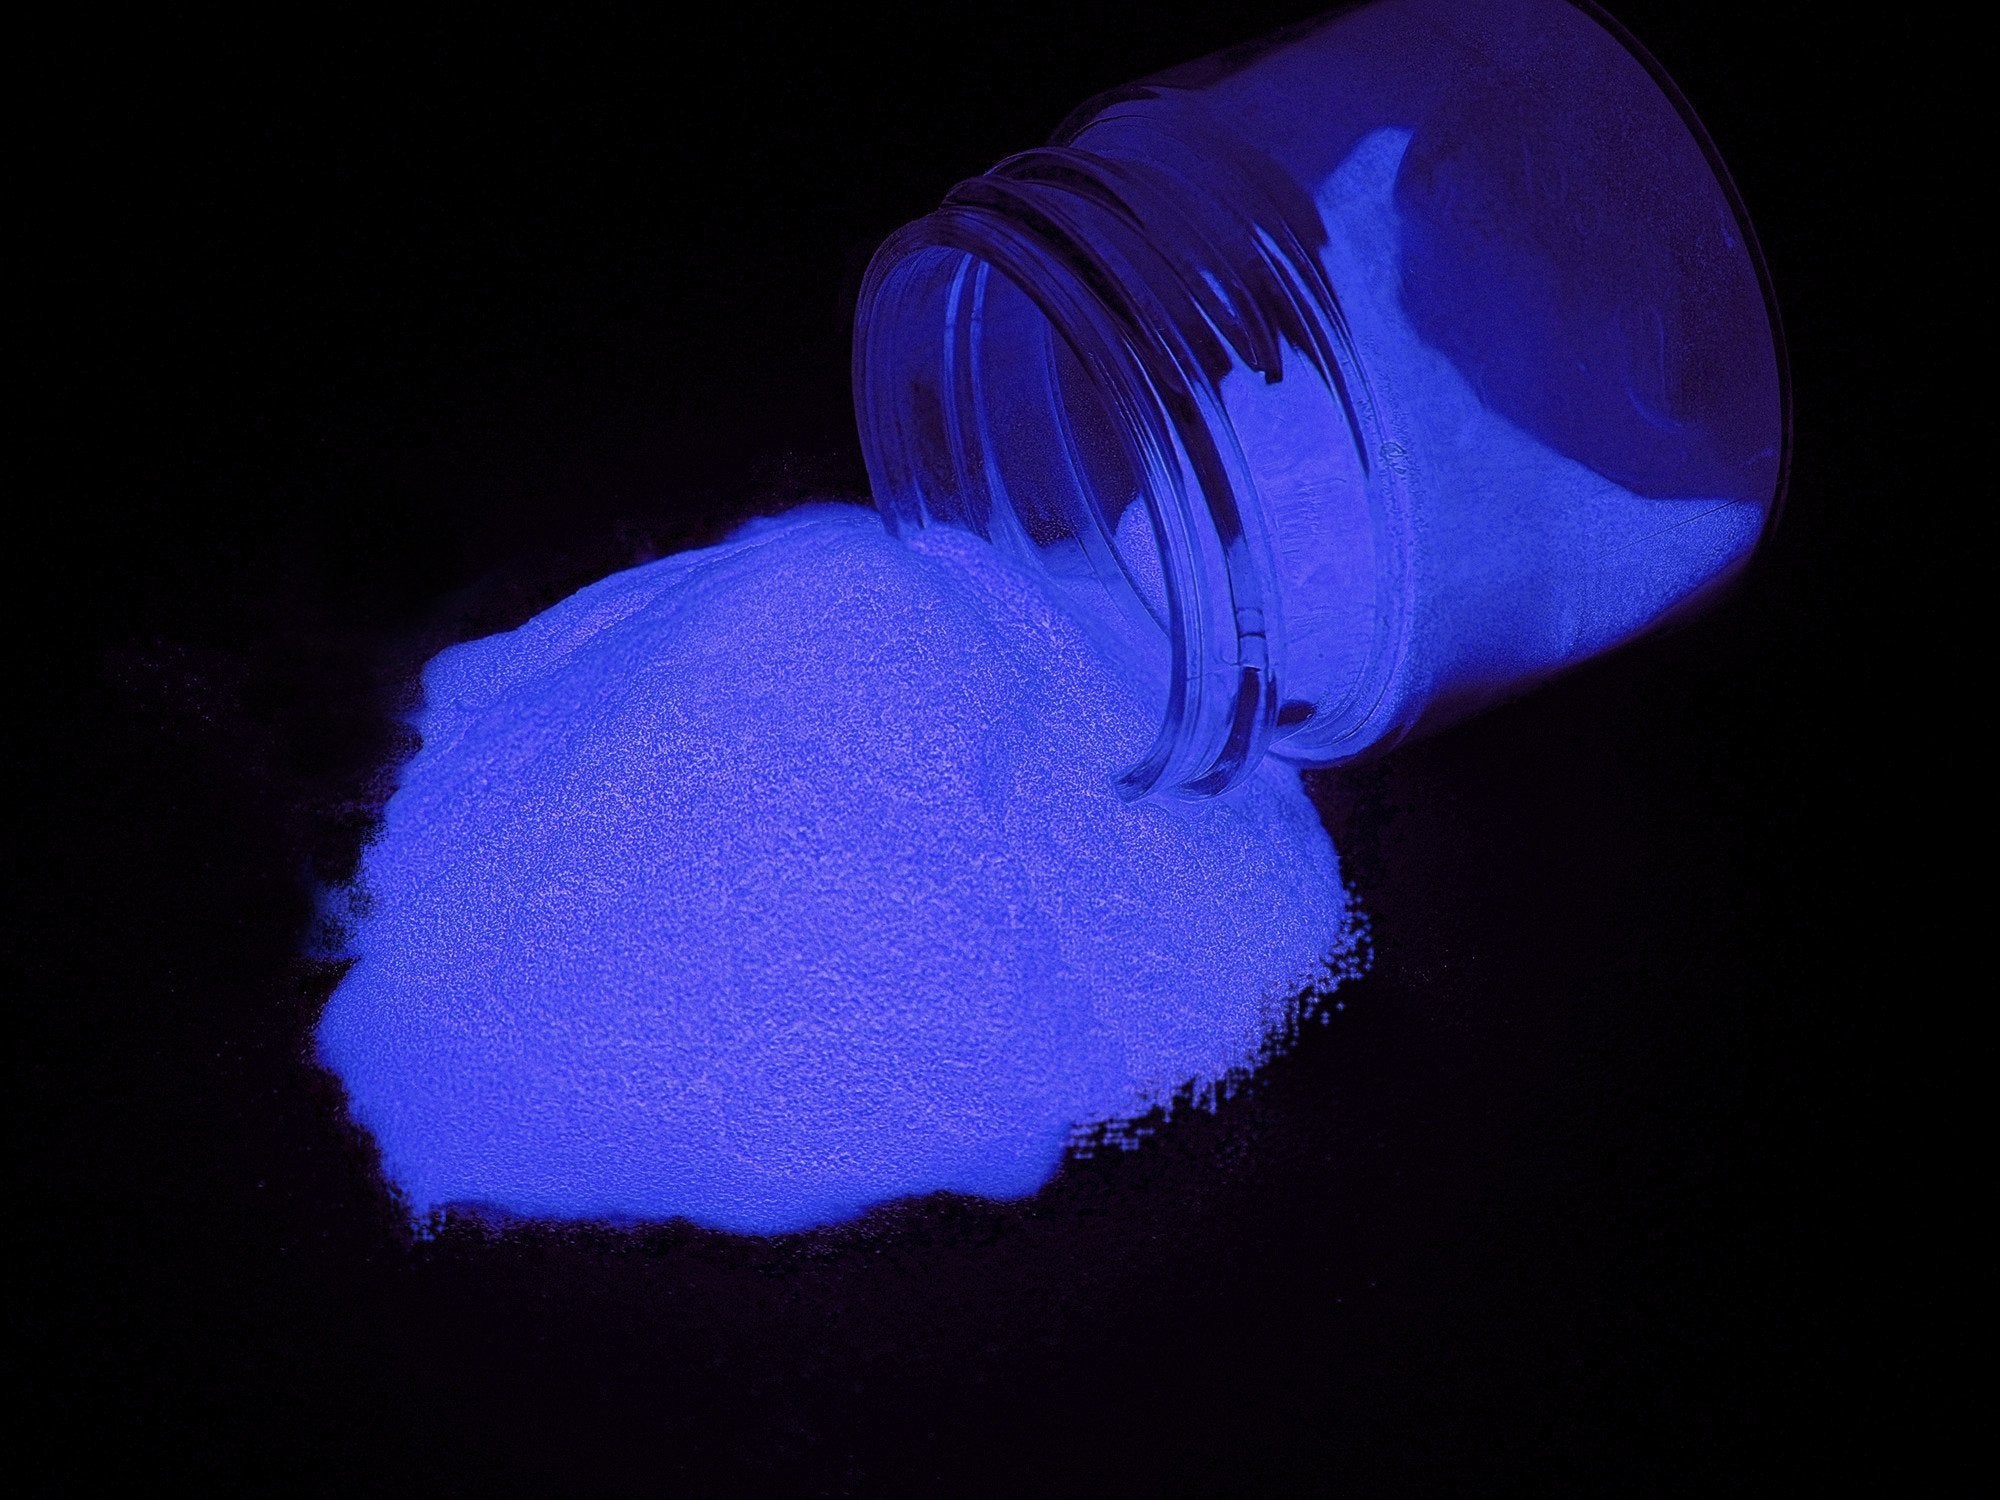 Sky Blue Glow in the Dark Epoxy Color Powder by Pigmently